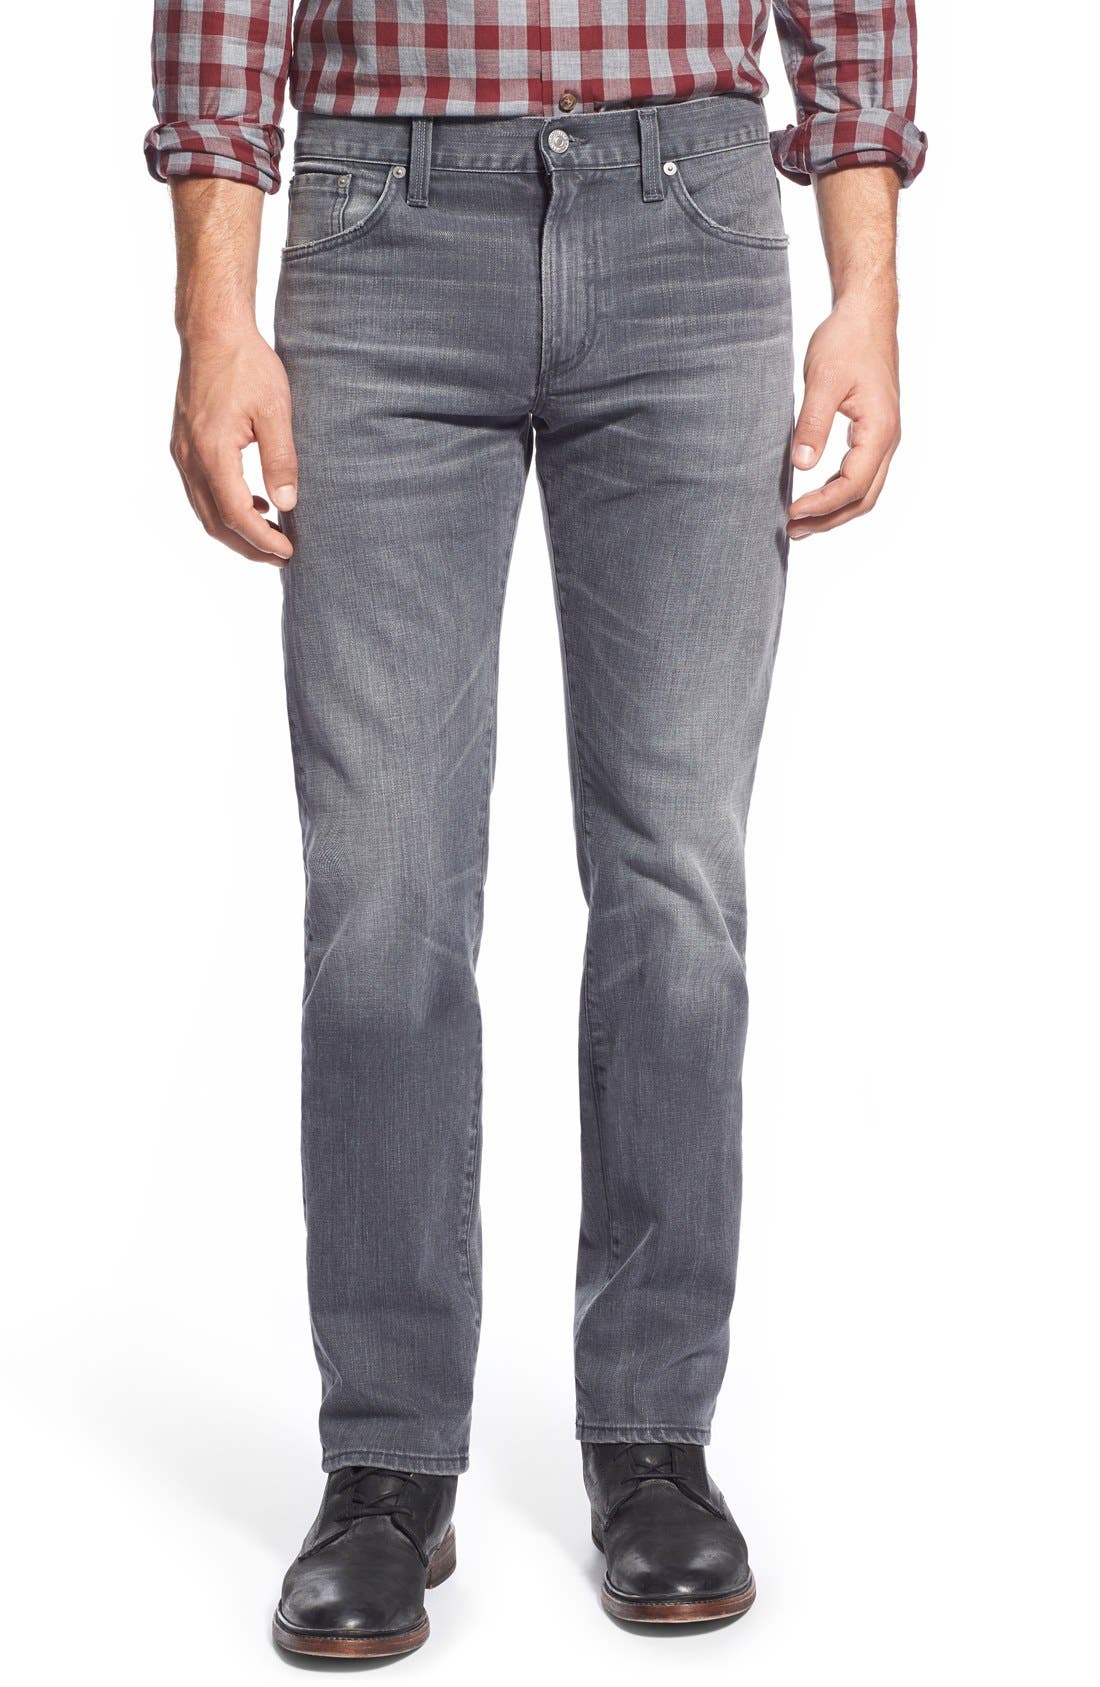 citizens of humanity core slim fit jeans